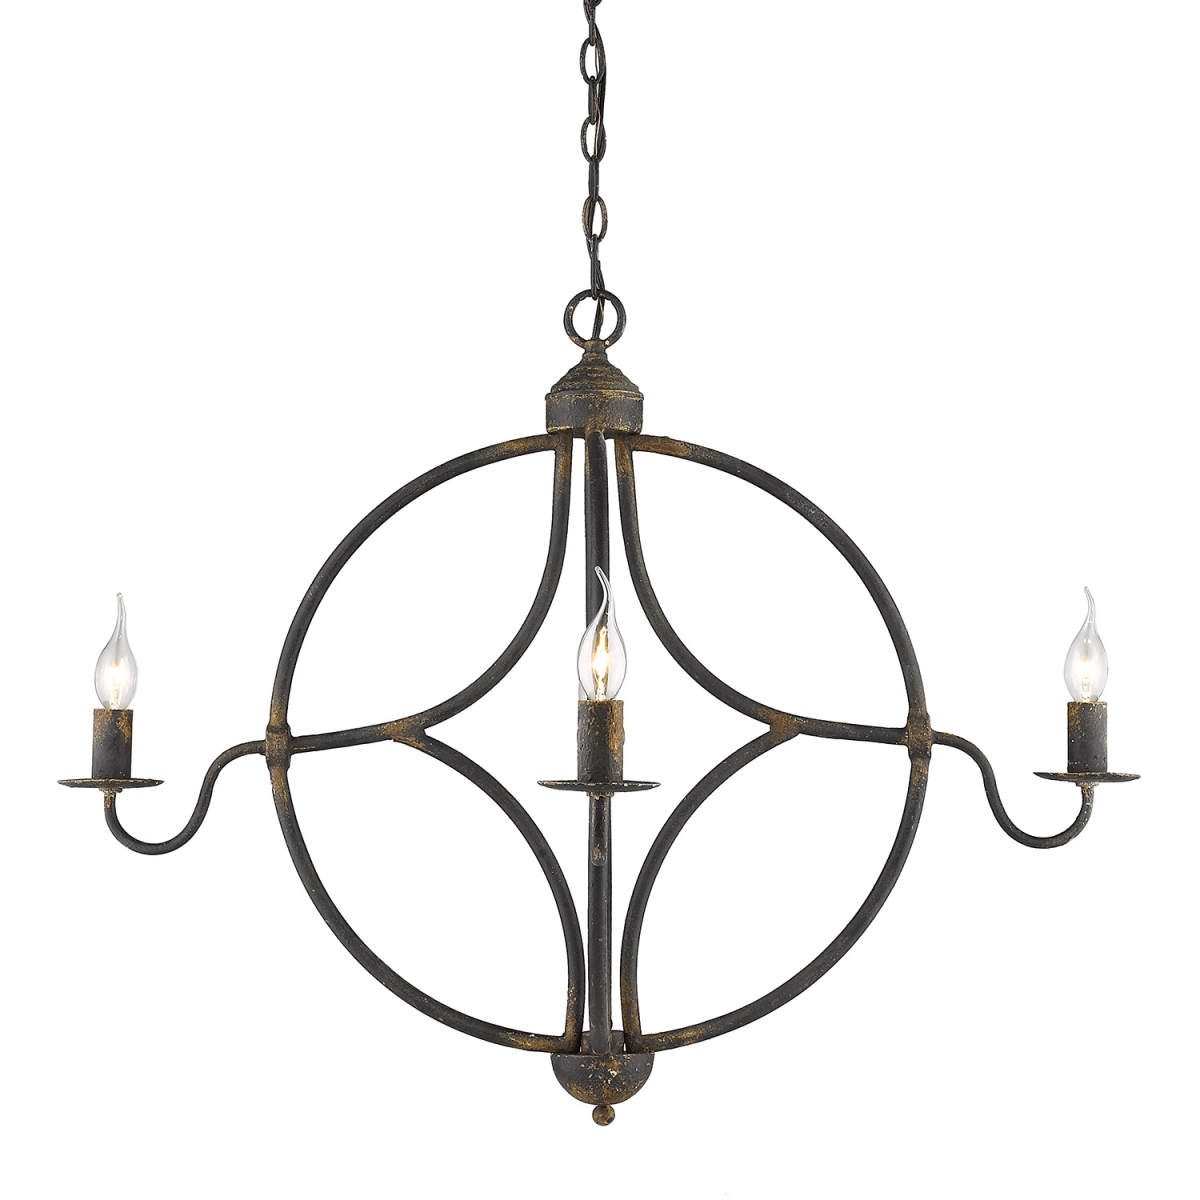 Picture of Golden Lighting 0830-4 ABI 33 in. Caspian 4 Lights Antique Black Iron Caged Foyer Ceiling Light